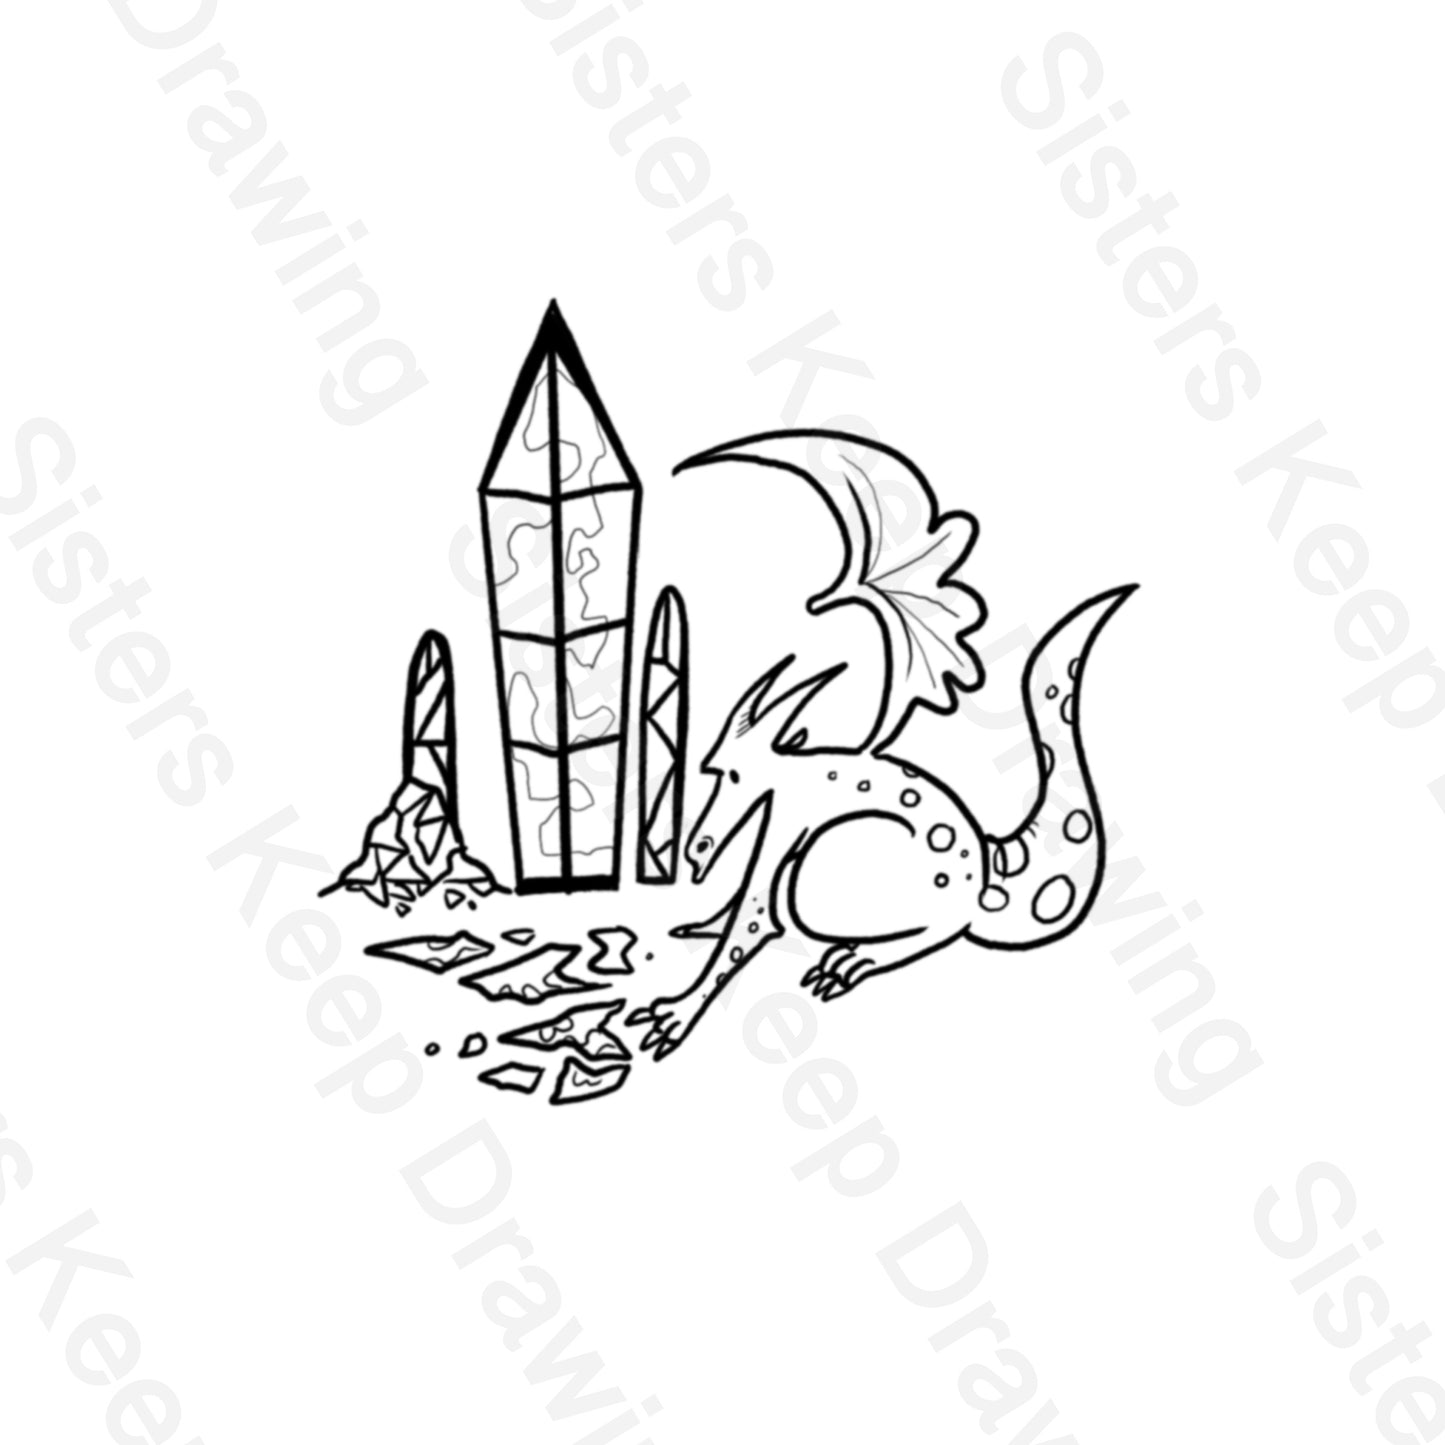 Dragon Stained Glass  - Tattoo Transparent Permission PNG- instant download digital printable artwork